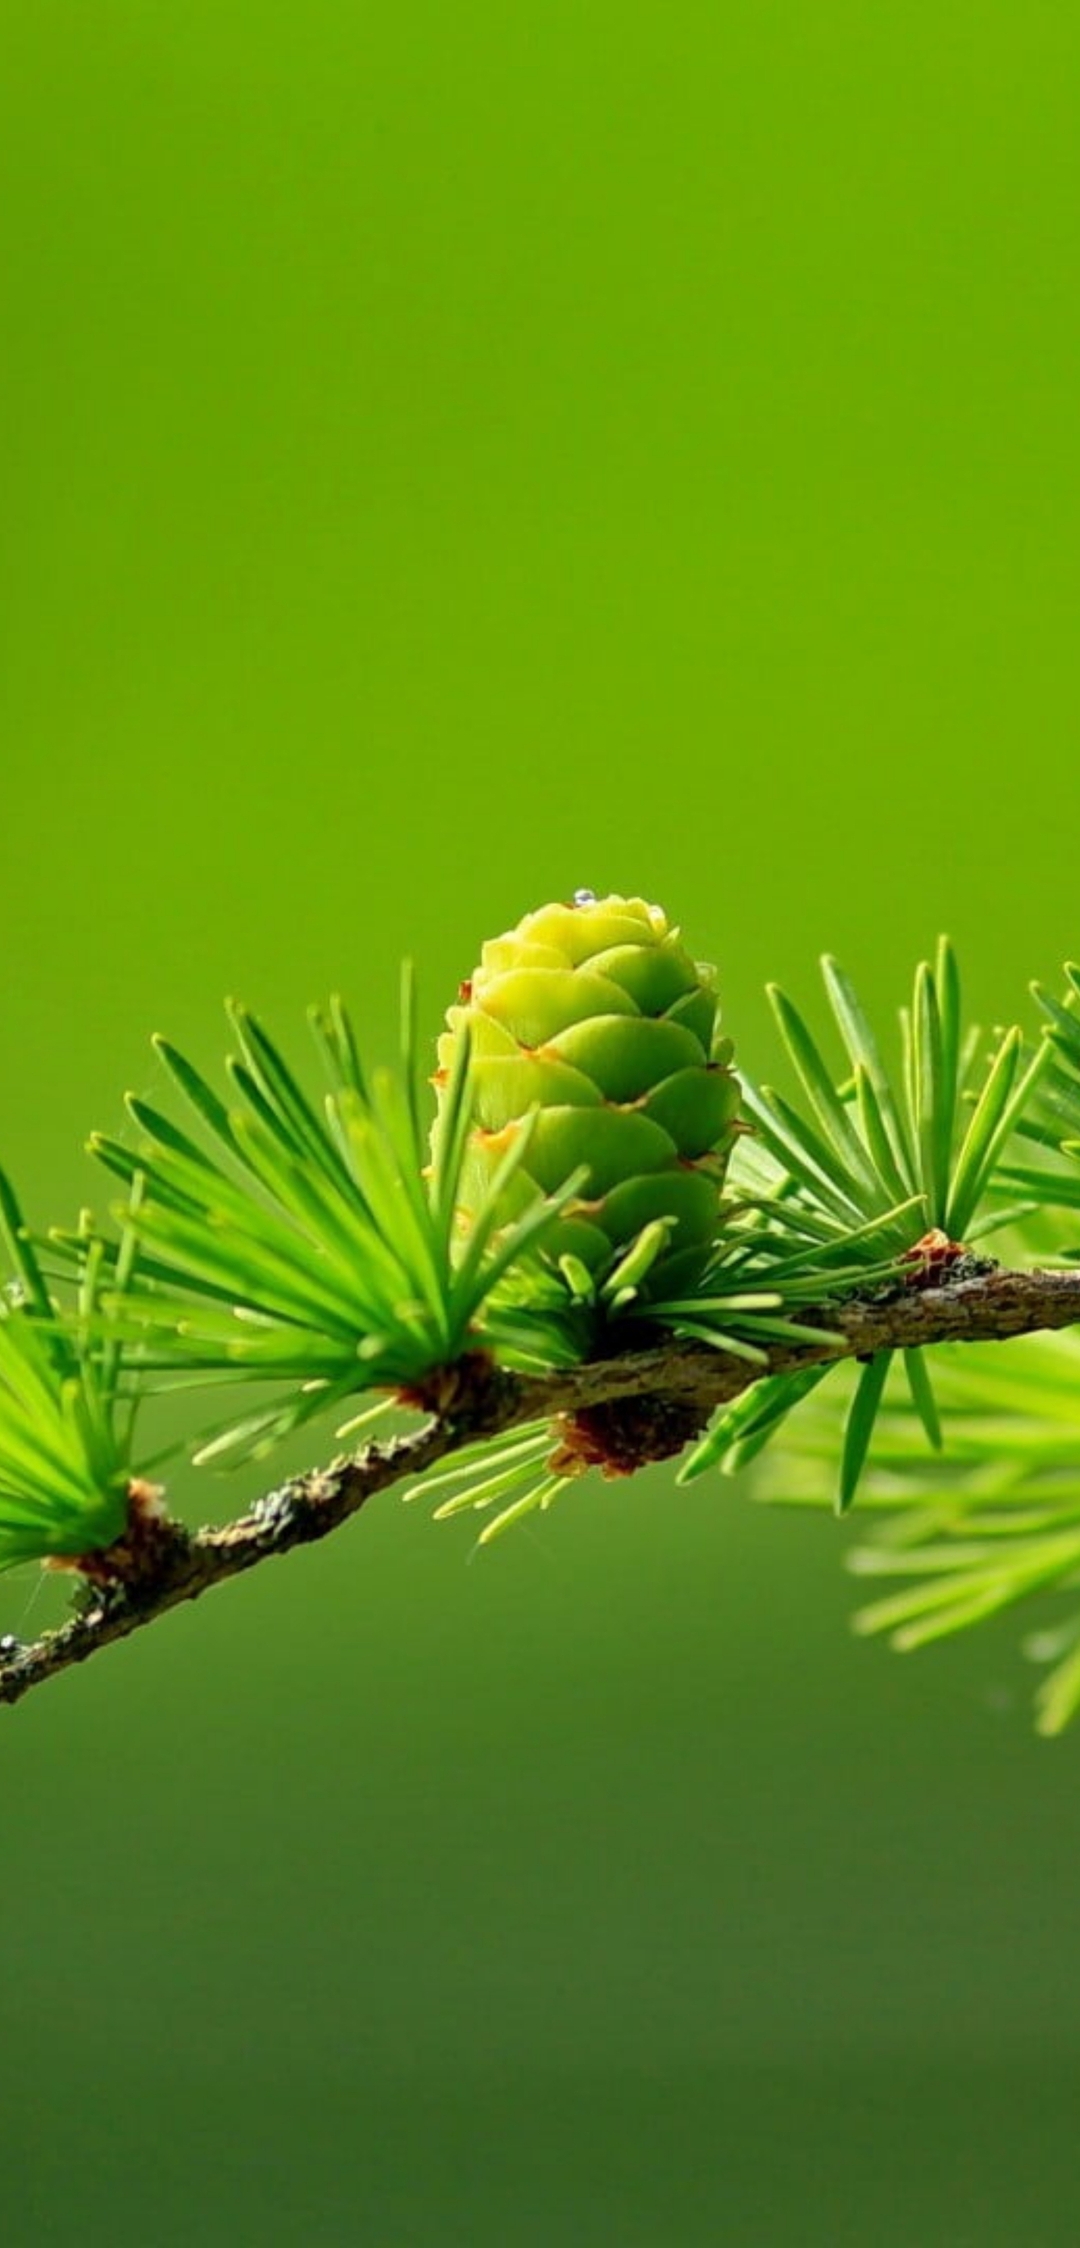 Image: Pine, larch, pinecone, green, needles, green background